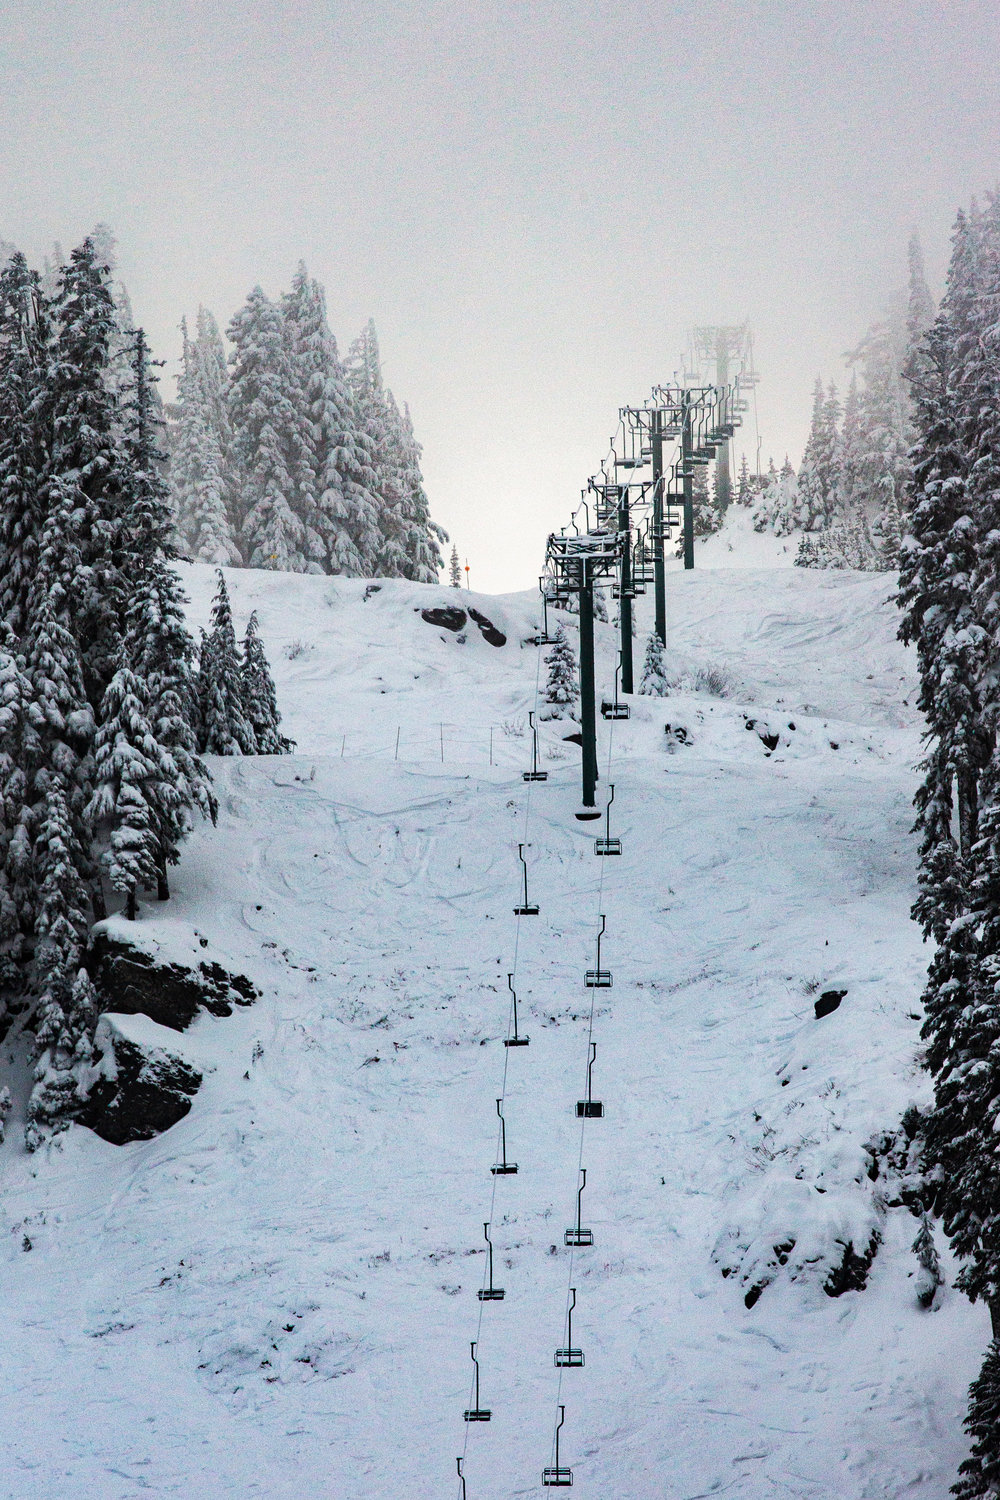 Chair lifts are seen above snow-covered evergreen trees at White Pass Ski Area on the line between Lewis and Yakima counties on Tuesday afternoon.